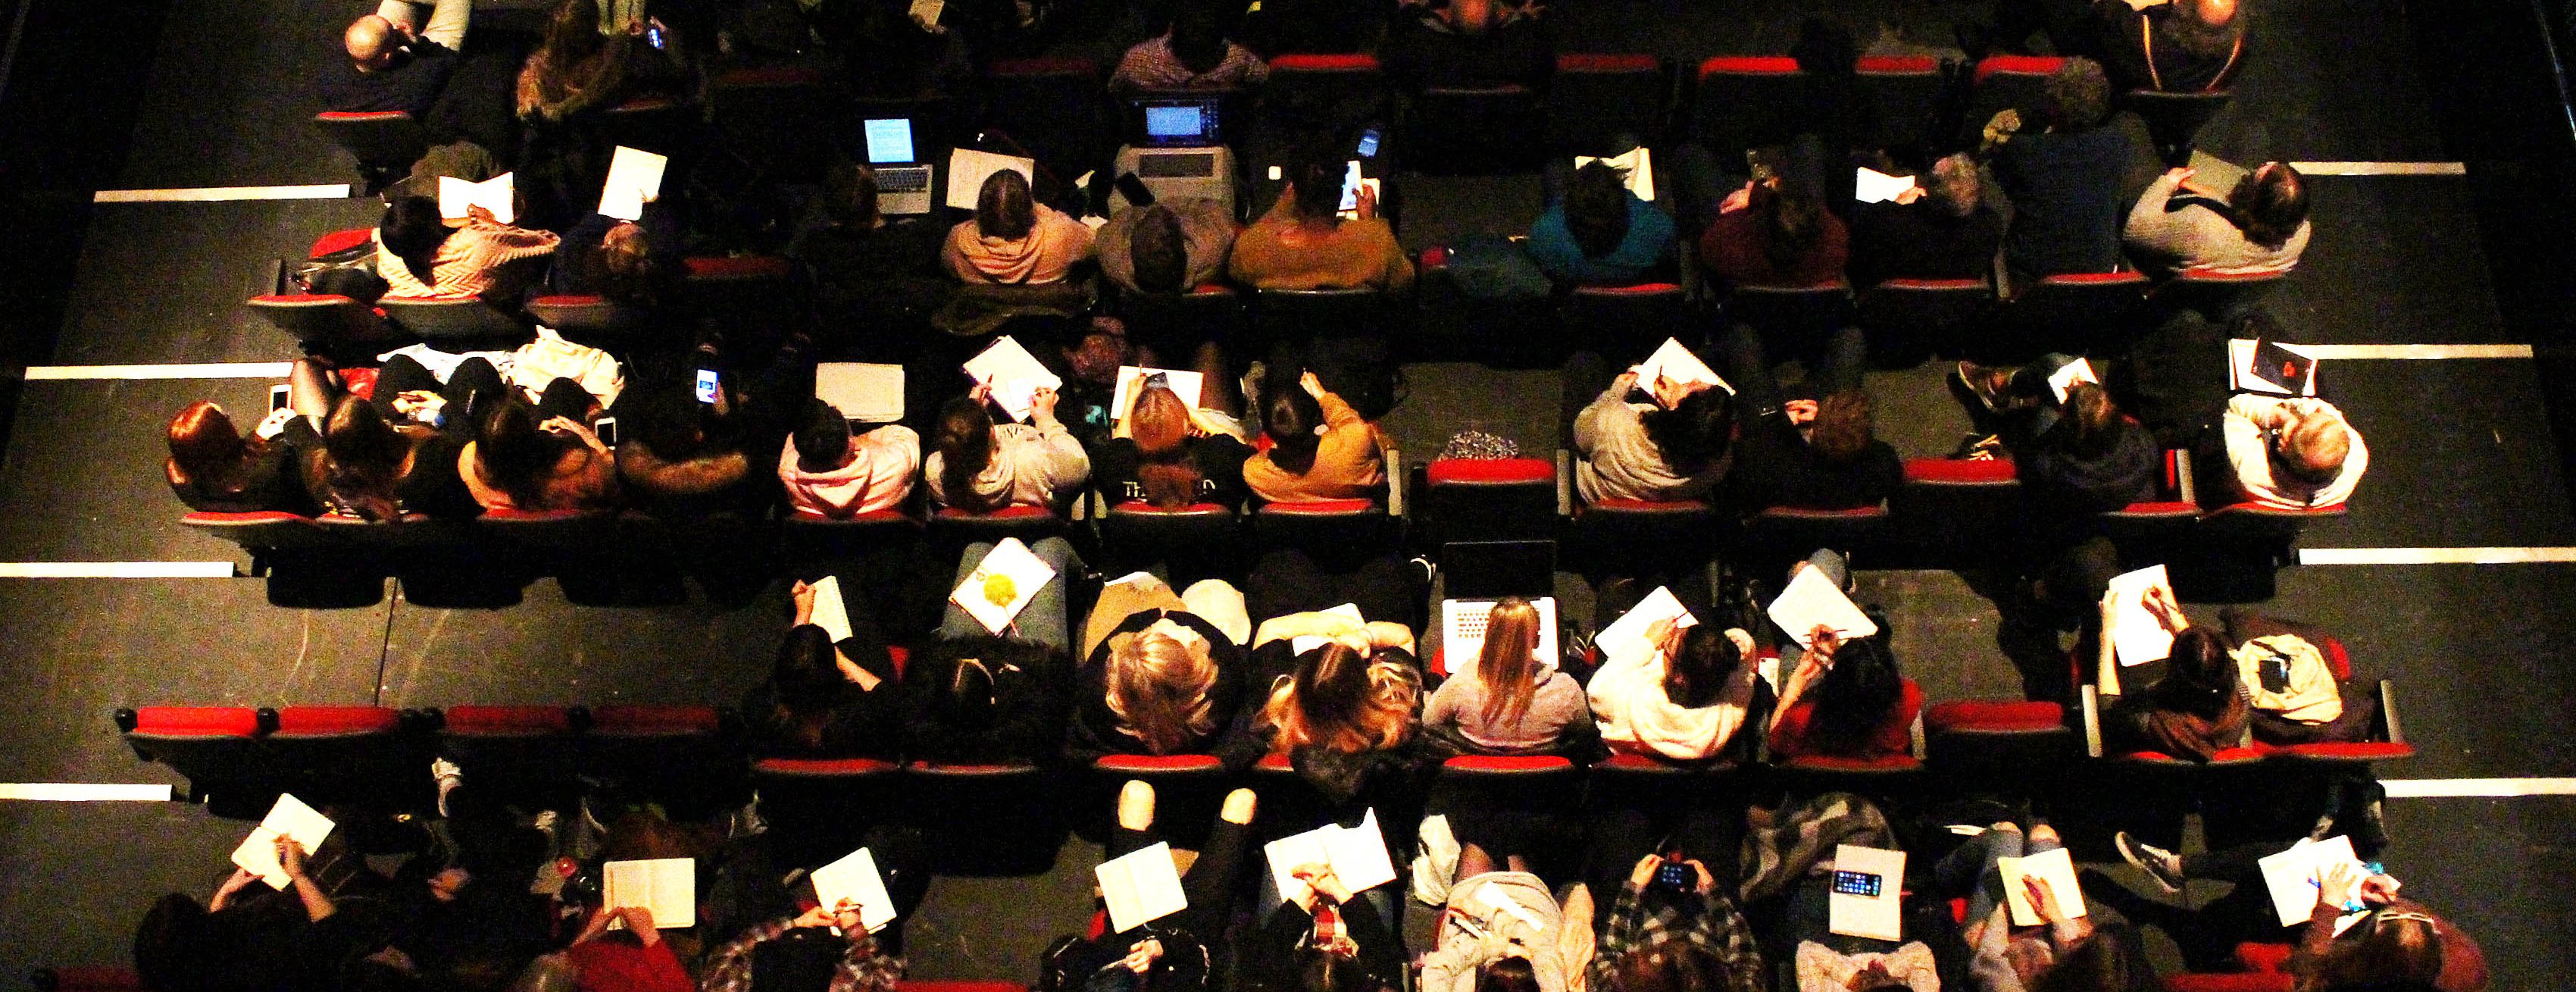 Birdseye view image of students making notes at the conference